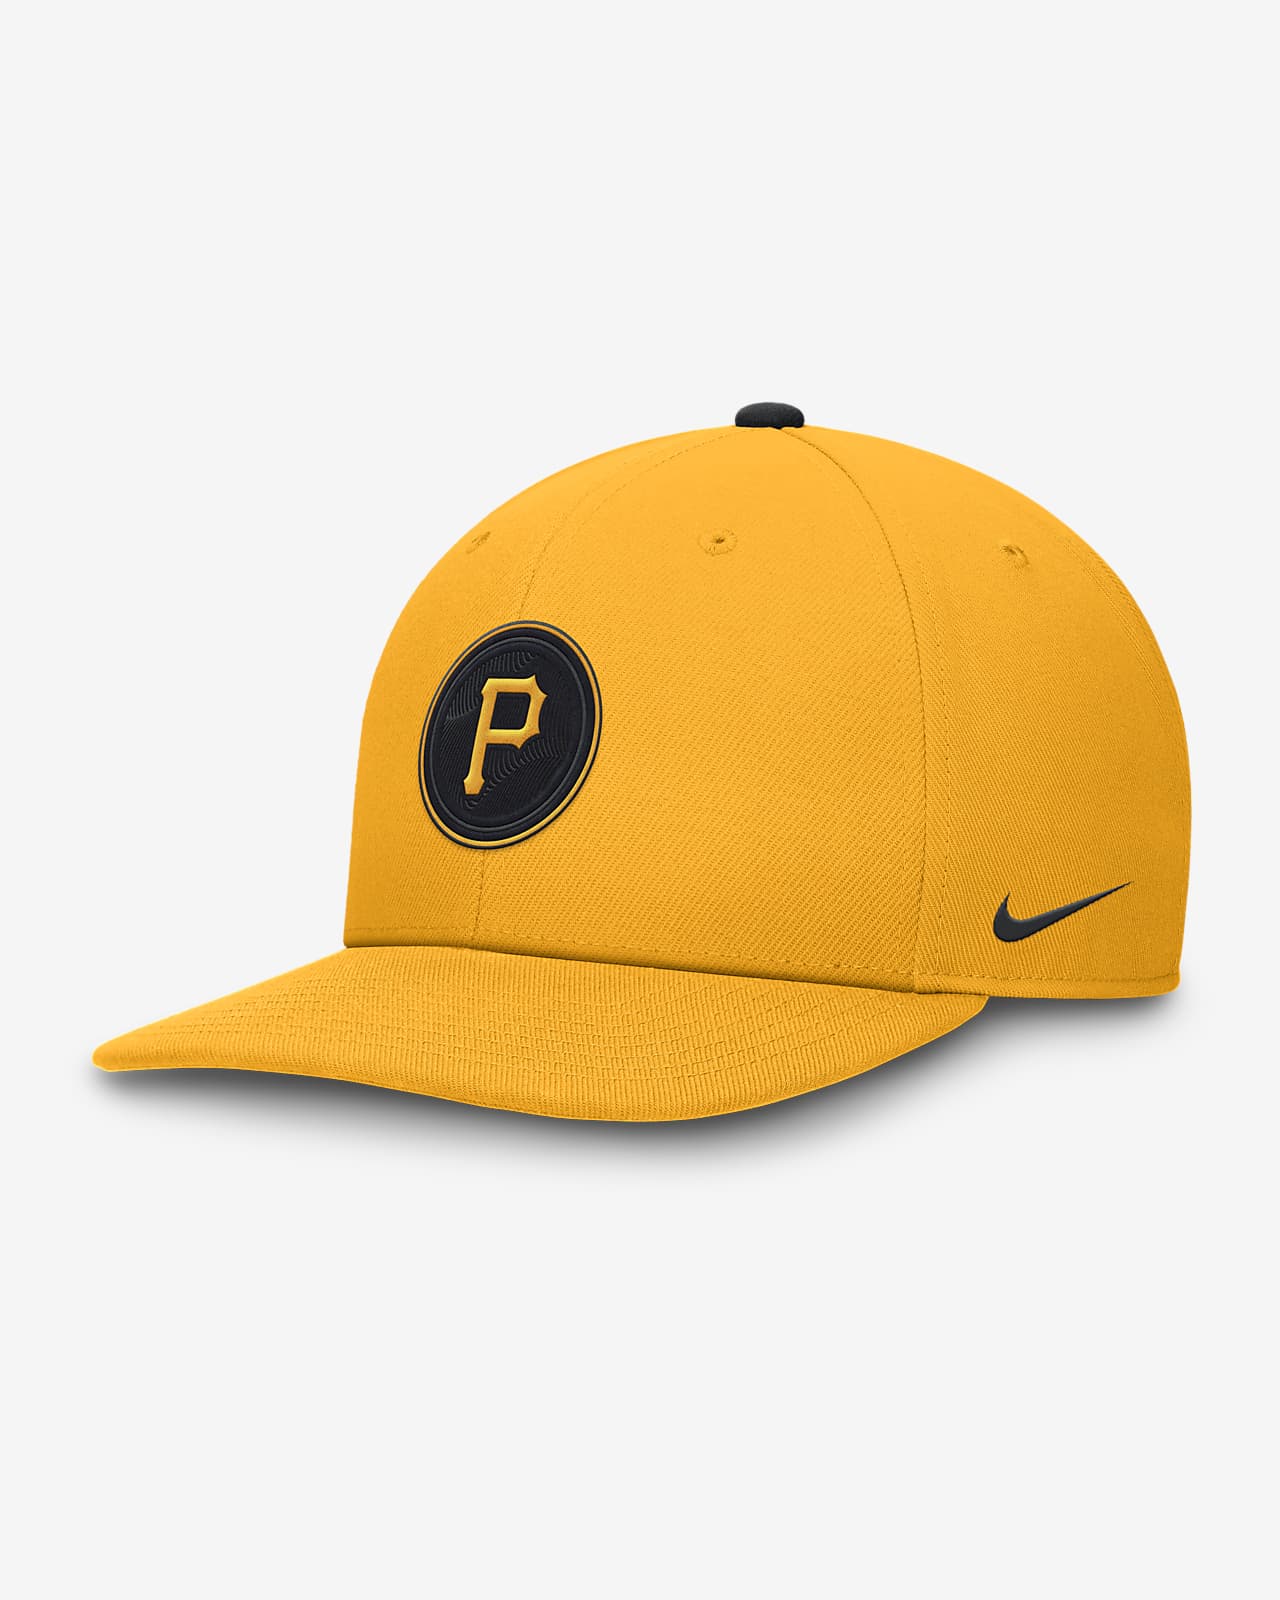 Pittsburgh Pirates City Connect Pro Nike Dri-FIT MLB Adjustable Hat